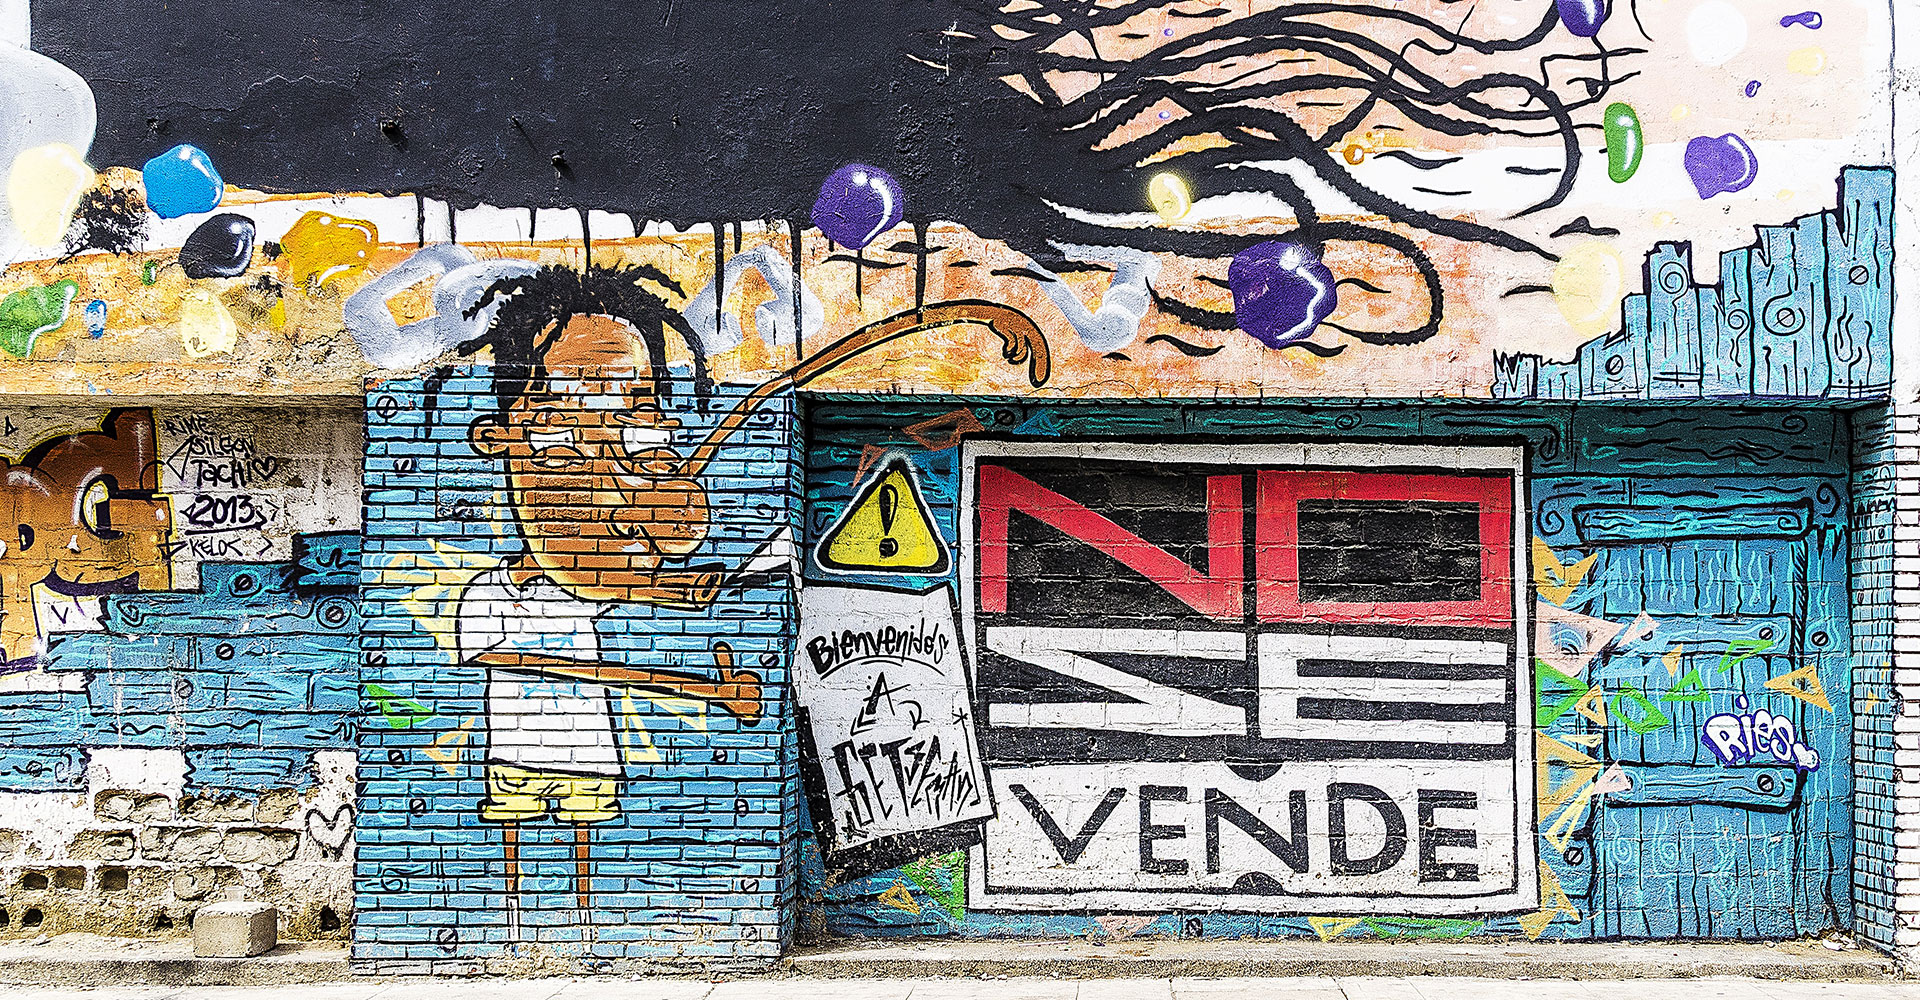 Social Justice: Activism in Latin America. Graffiti on wall, 'No se vende (Not for sale)'.